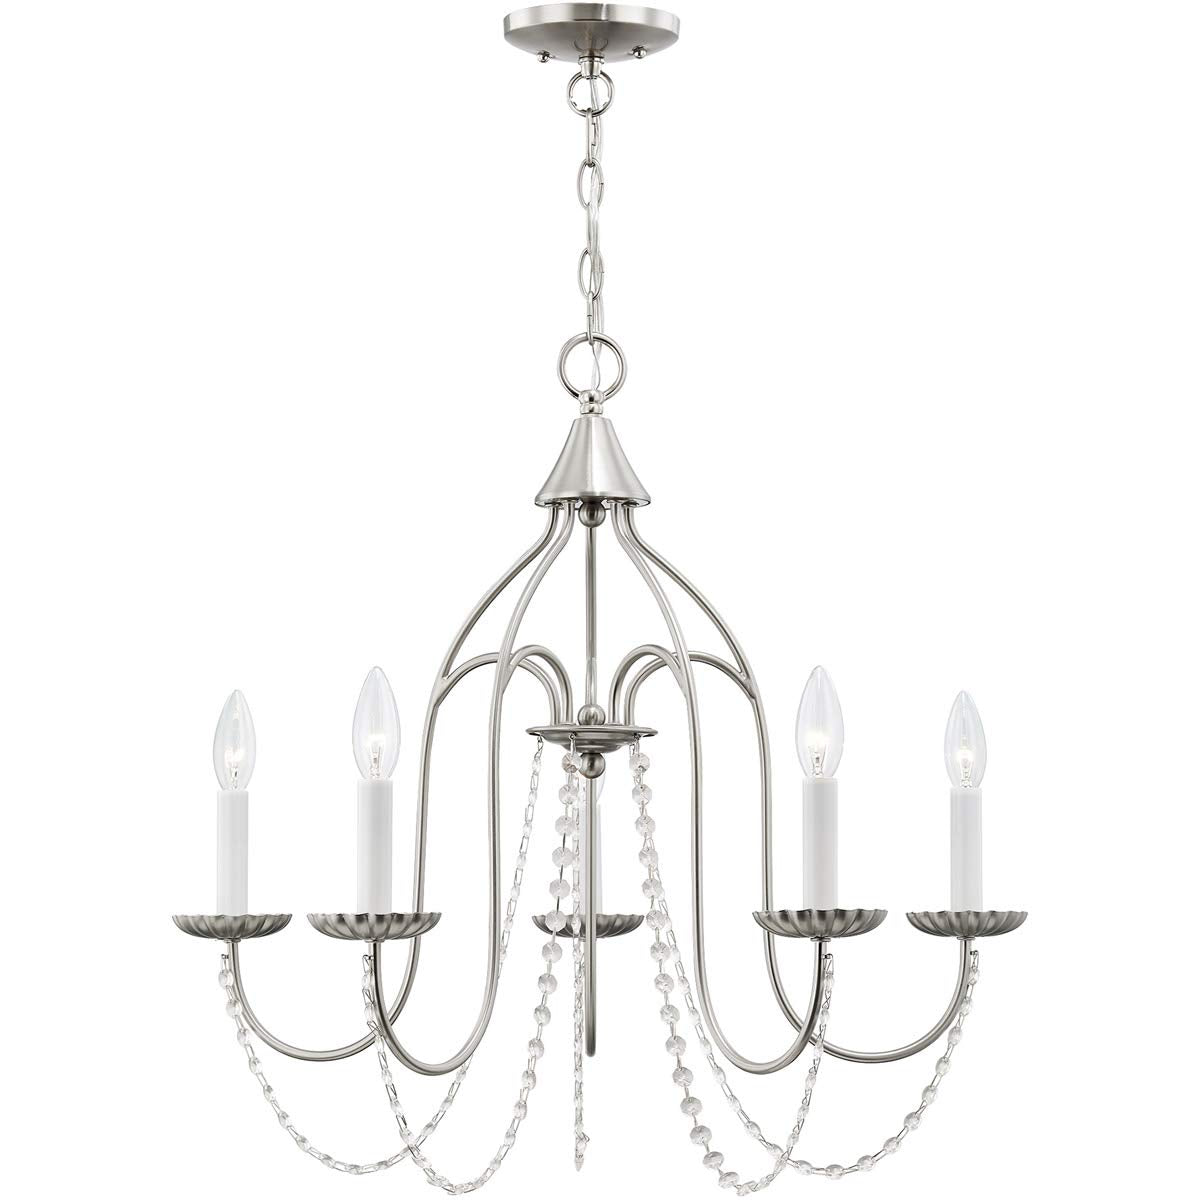 Livex Lighting 40795-91 Transitional Five Light Chandelier from Alessia Collection in Pwt, Nckl, B/S, Slvr. Finish, Brushed Nickel